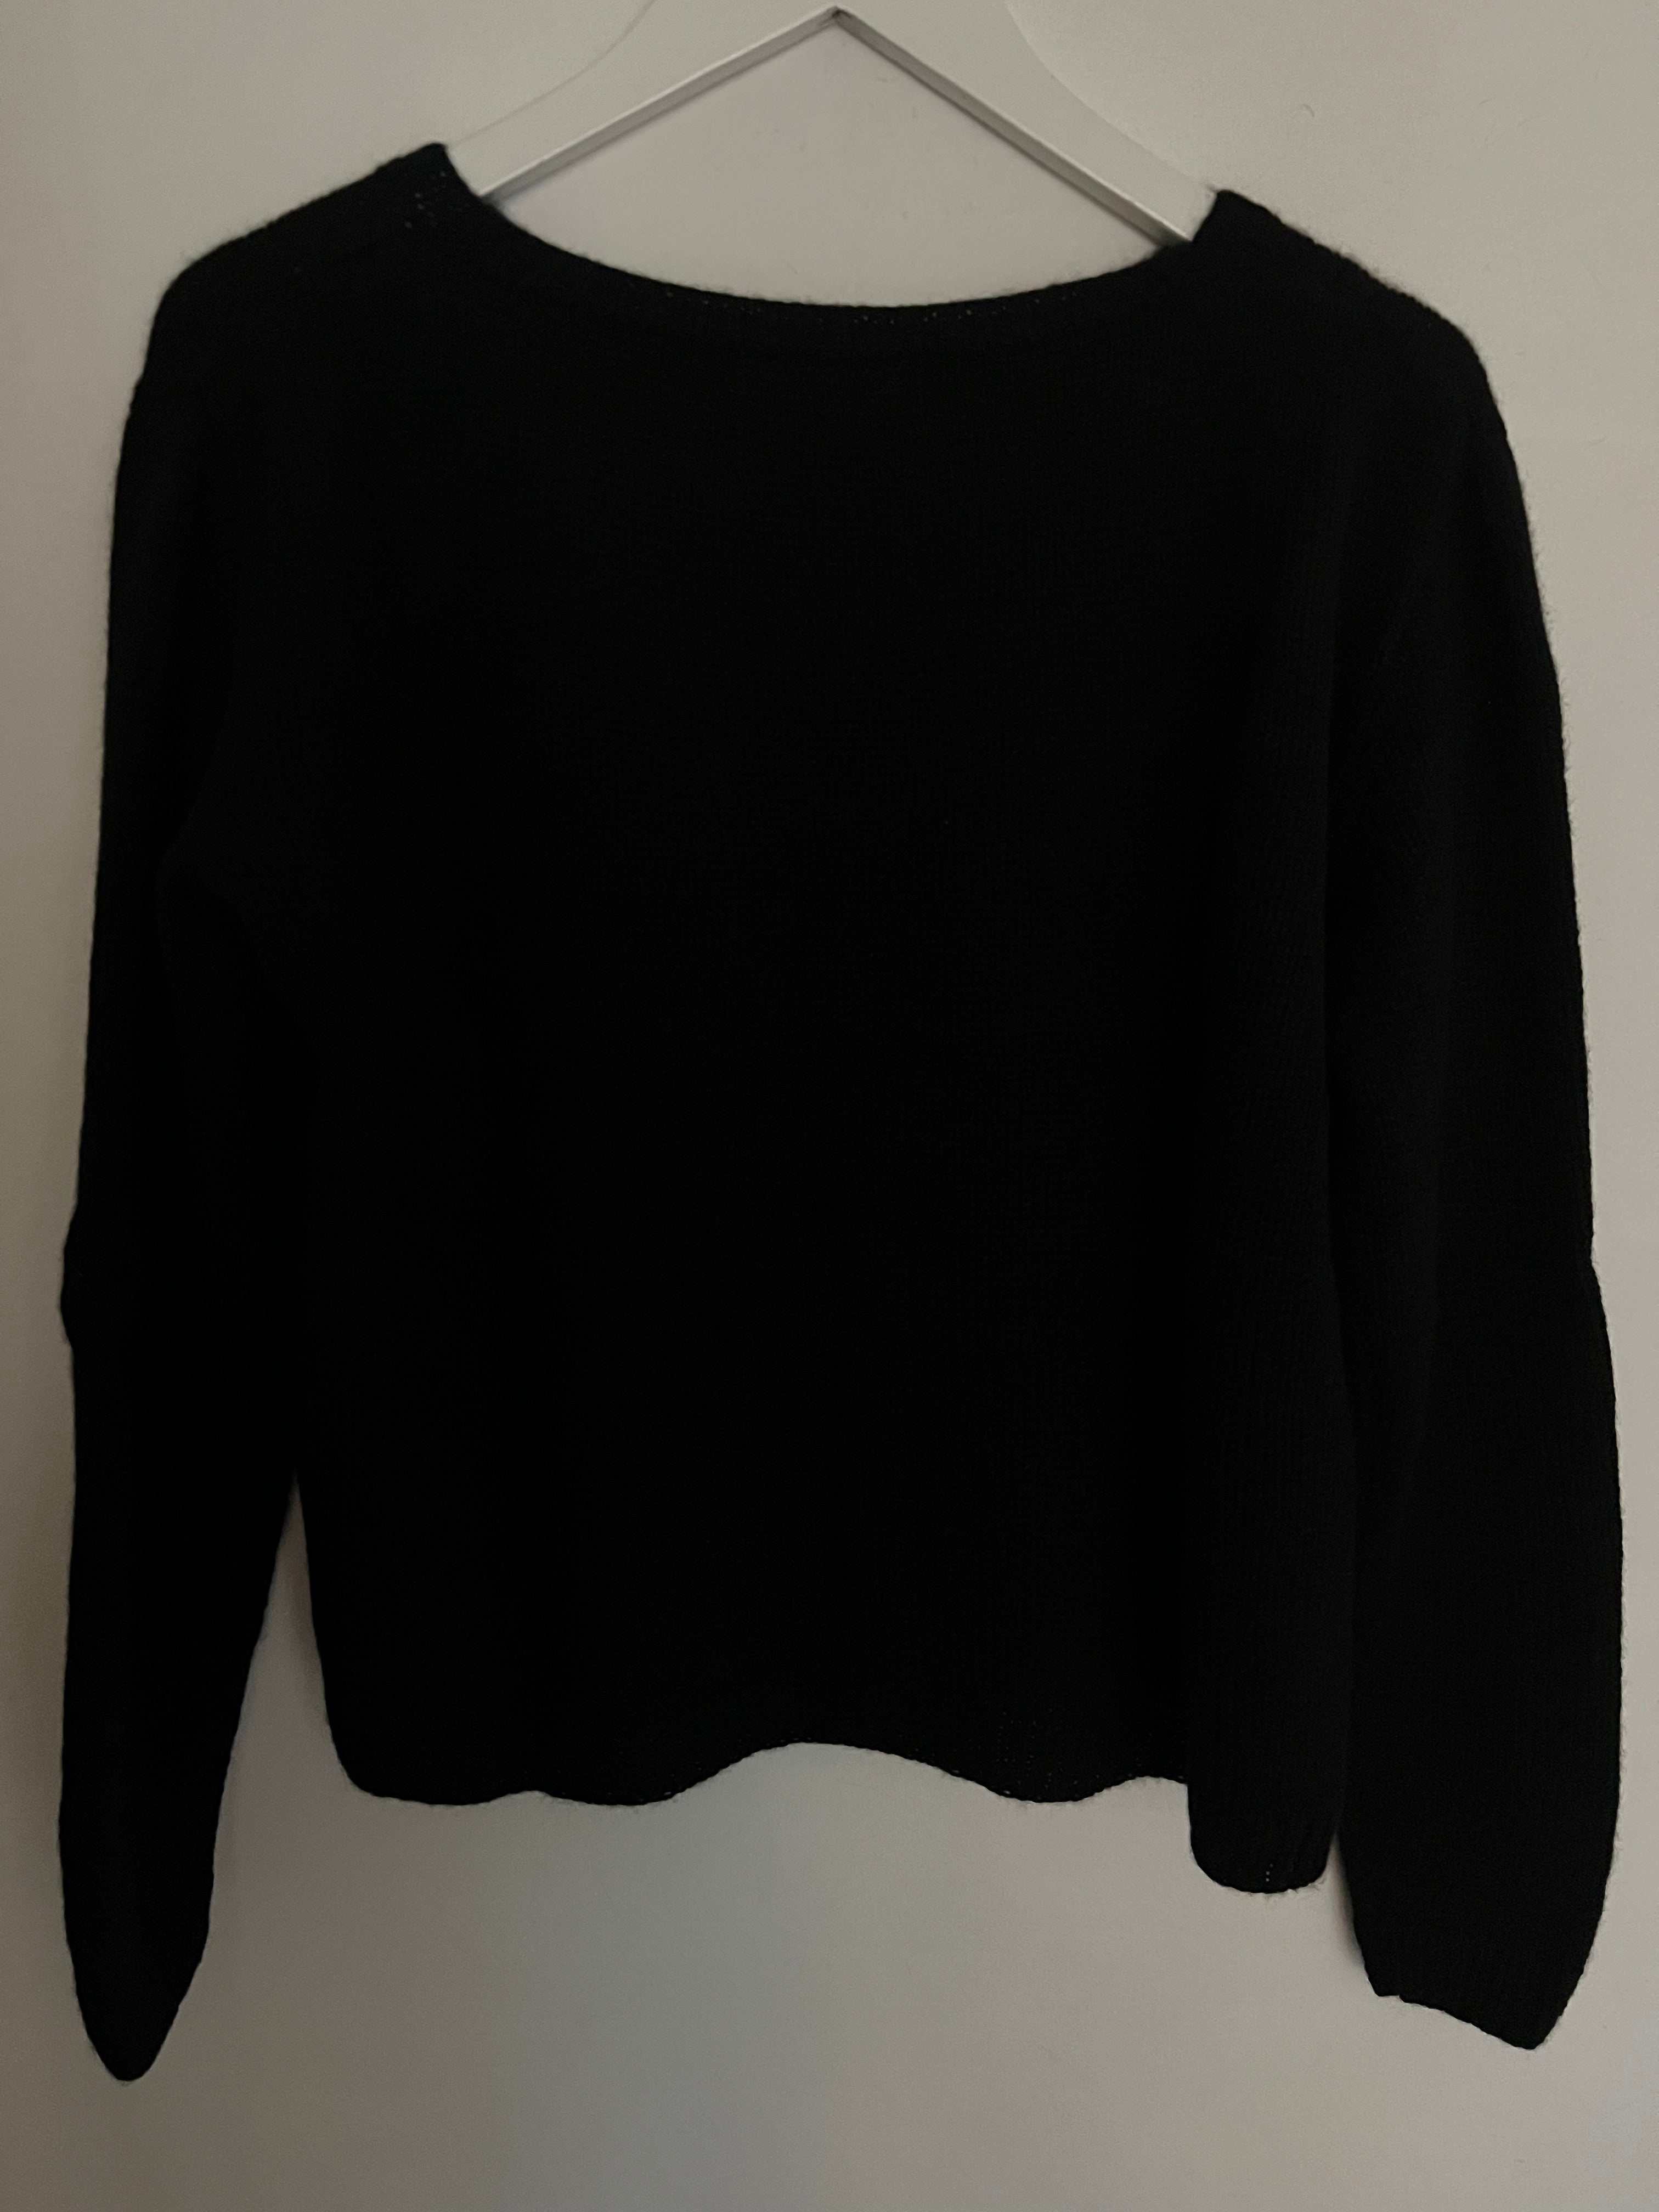 Hetre Alresford Hampshire Clothes Store English Weather Black Sophie Cashmere Sweater  